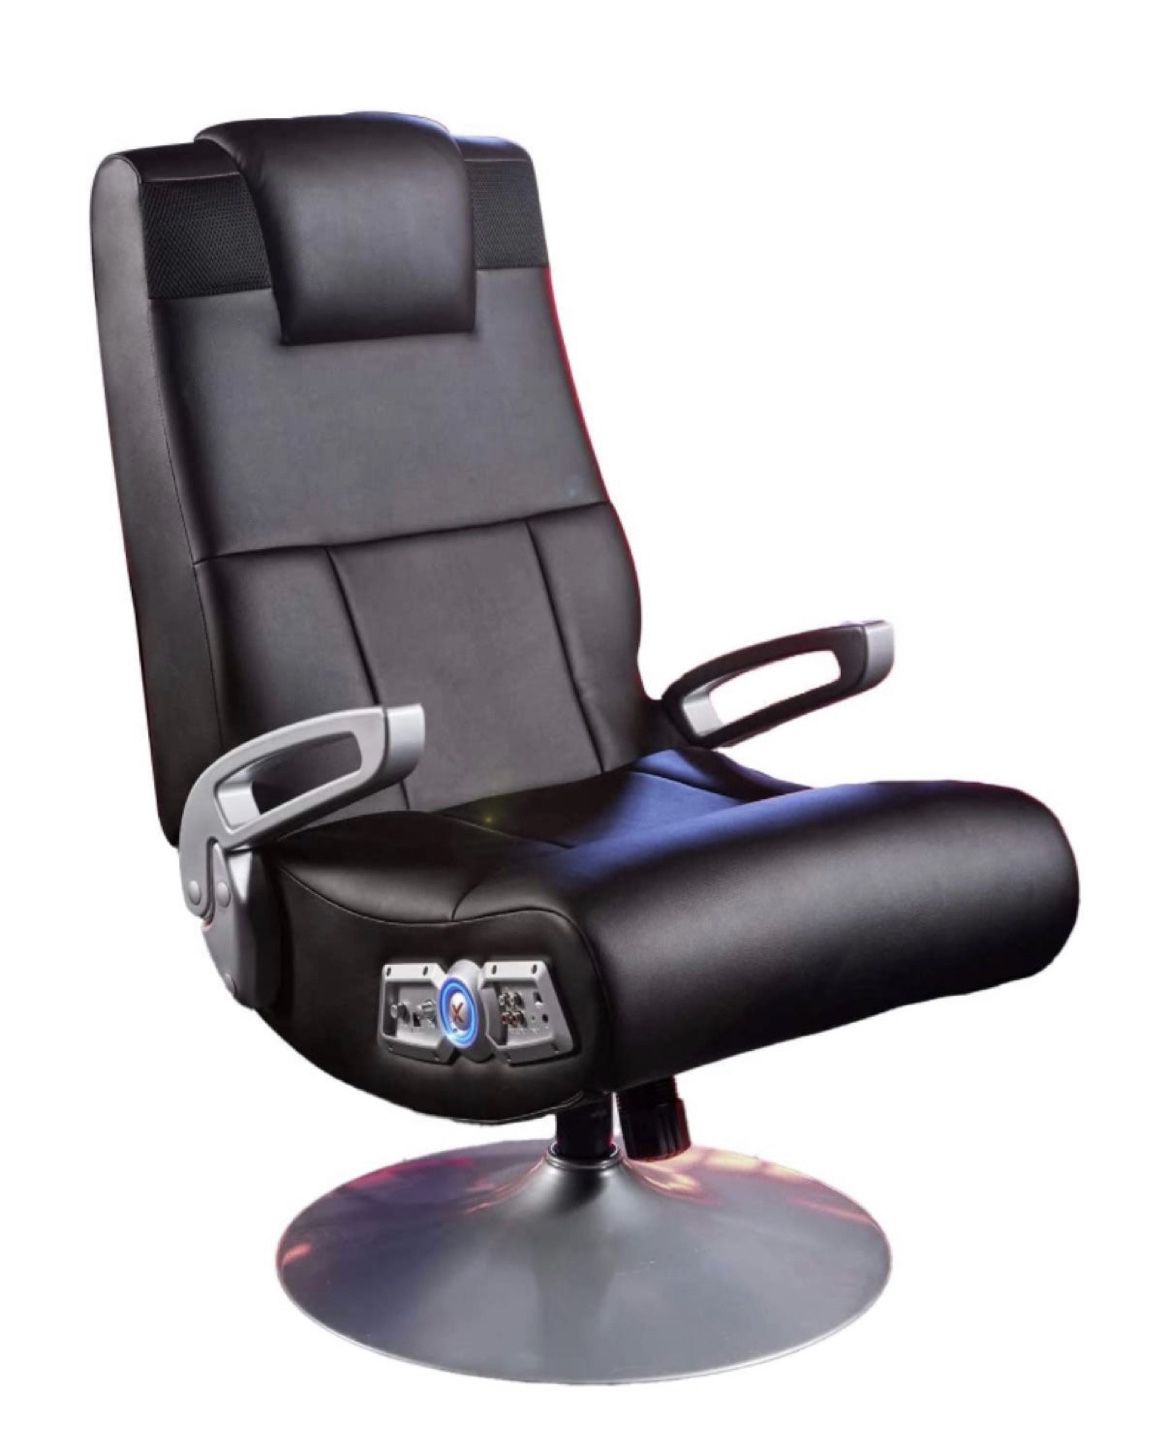 X Rocker SE Pro Video Gaming Lounging Pedestal Chair with Wireless Audio #2905